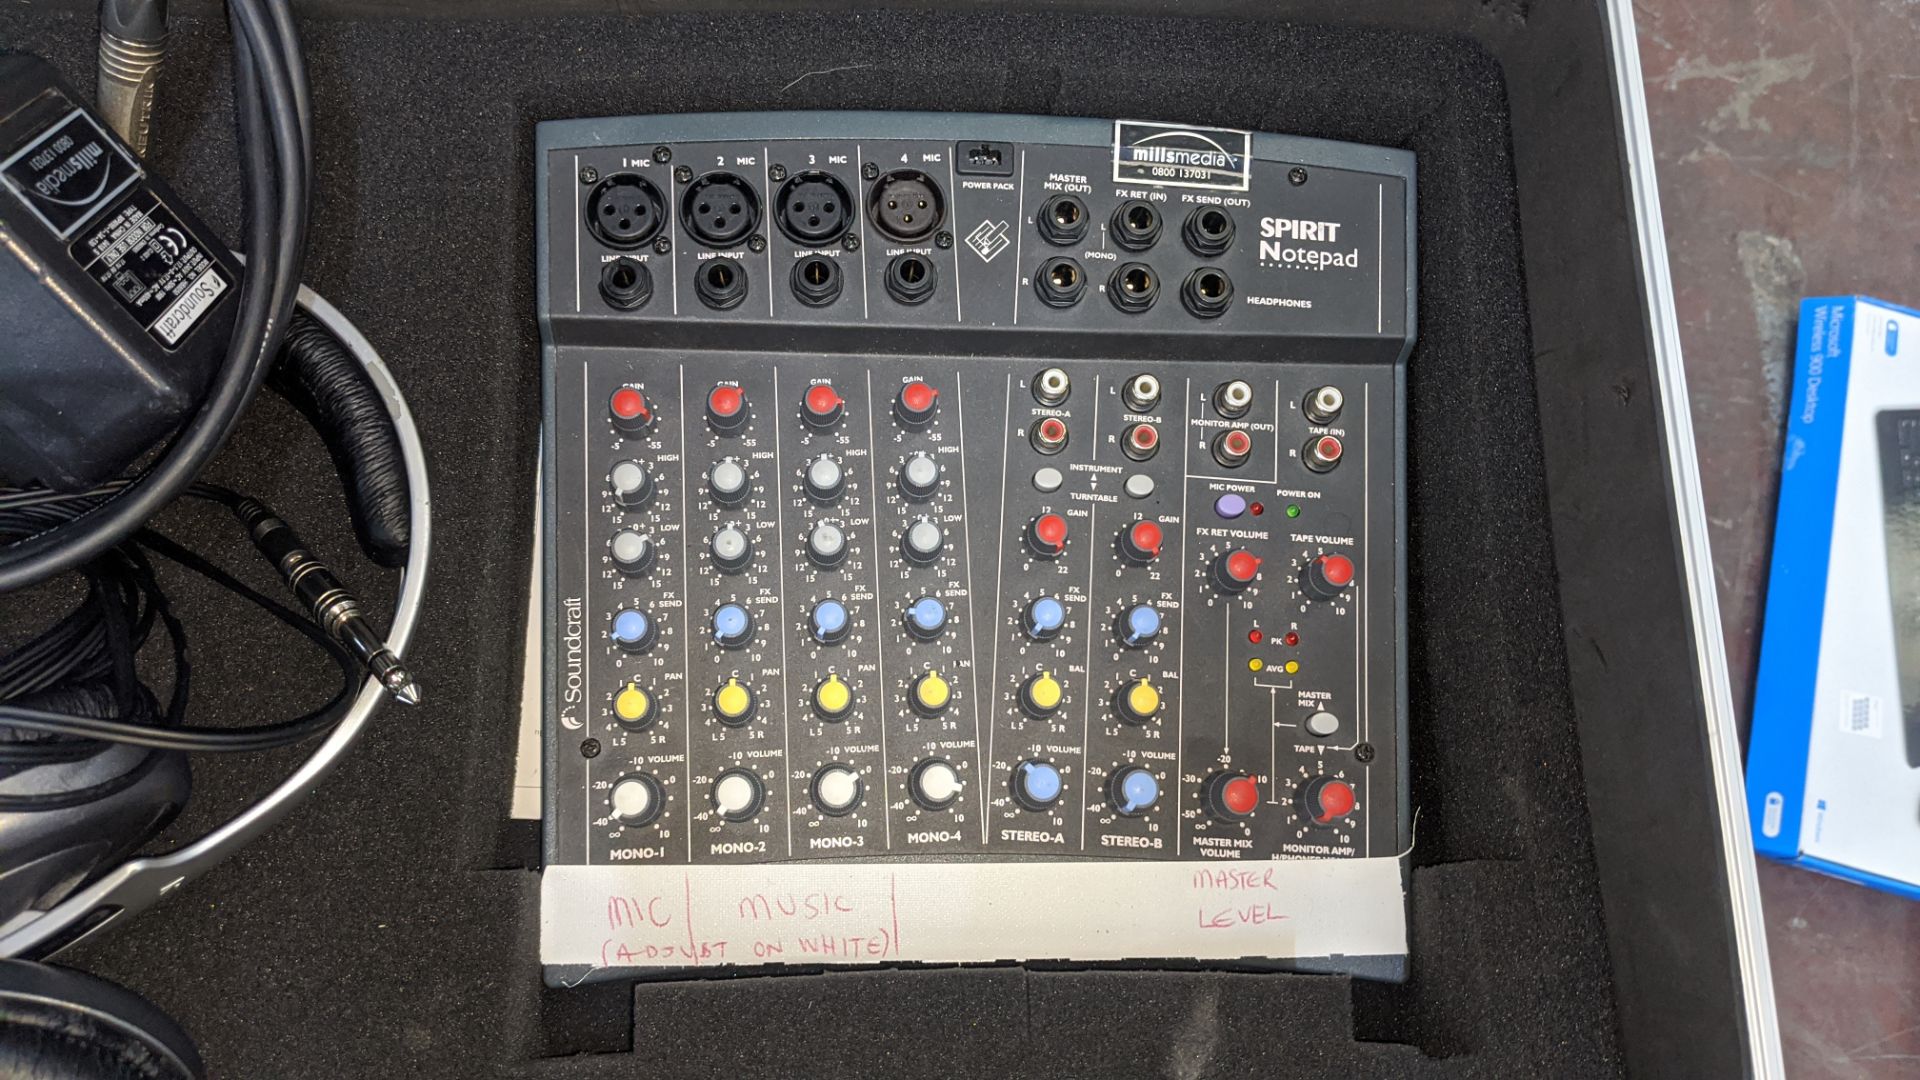 Soundcraft Spirit notepad mixing desk in case Lots 51 - 480 comprise the total assets of Mills Media - Image 3 of 7